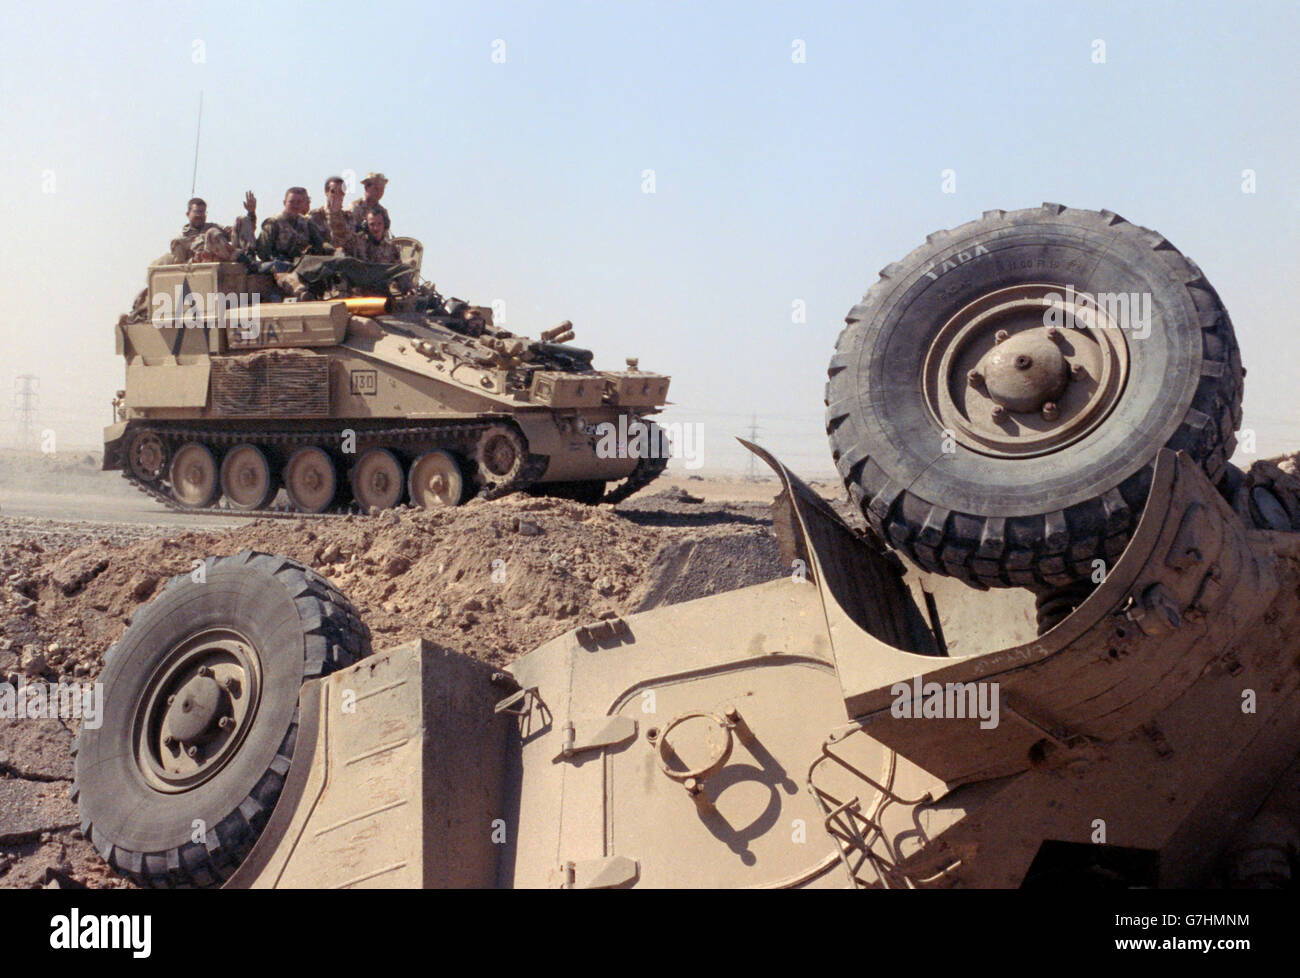 British soldiers riding on an armored personnel carrier pass a destroyed Iraqi APC in the desert following the liberation of Kuwait in Operation Desert Storm February 27, 1991 outside Kuwait City, Kuwait. Stock Photo